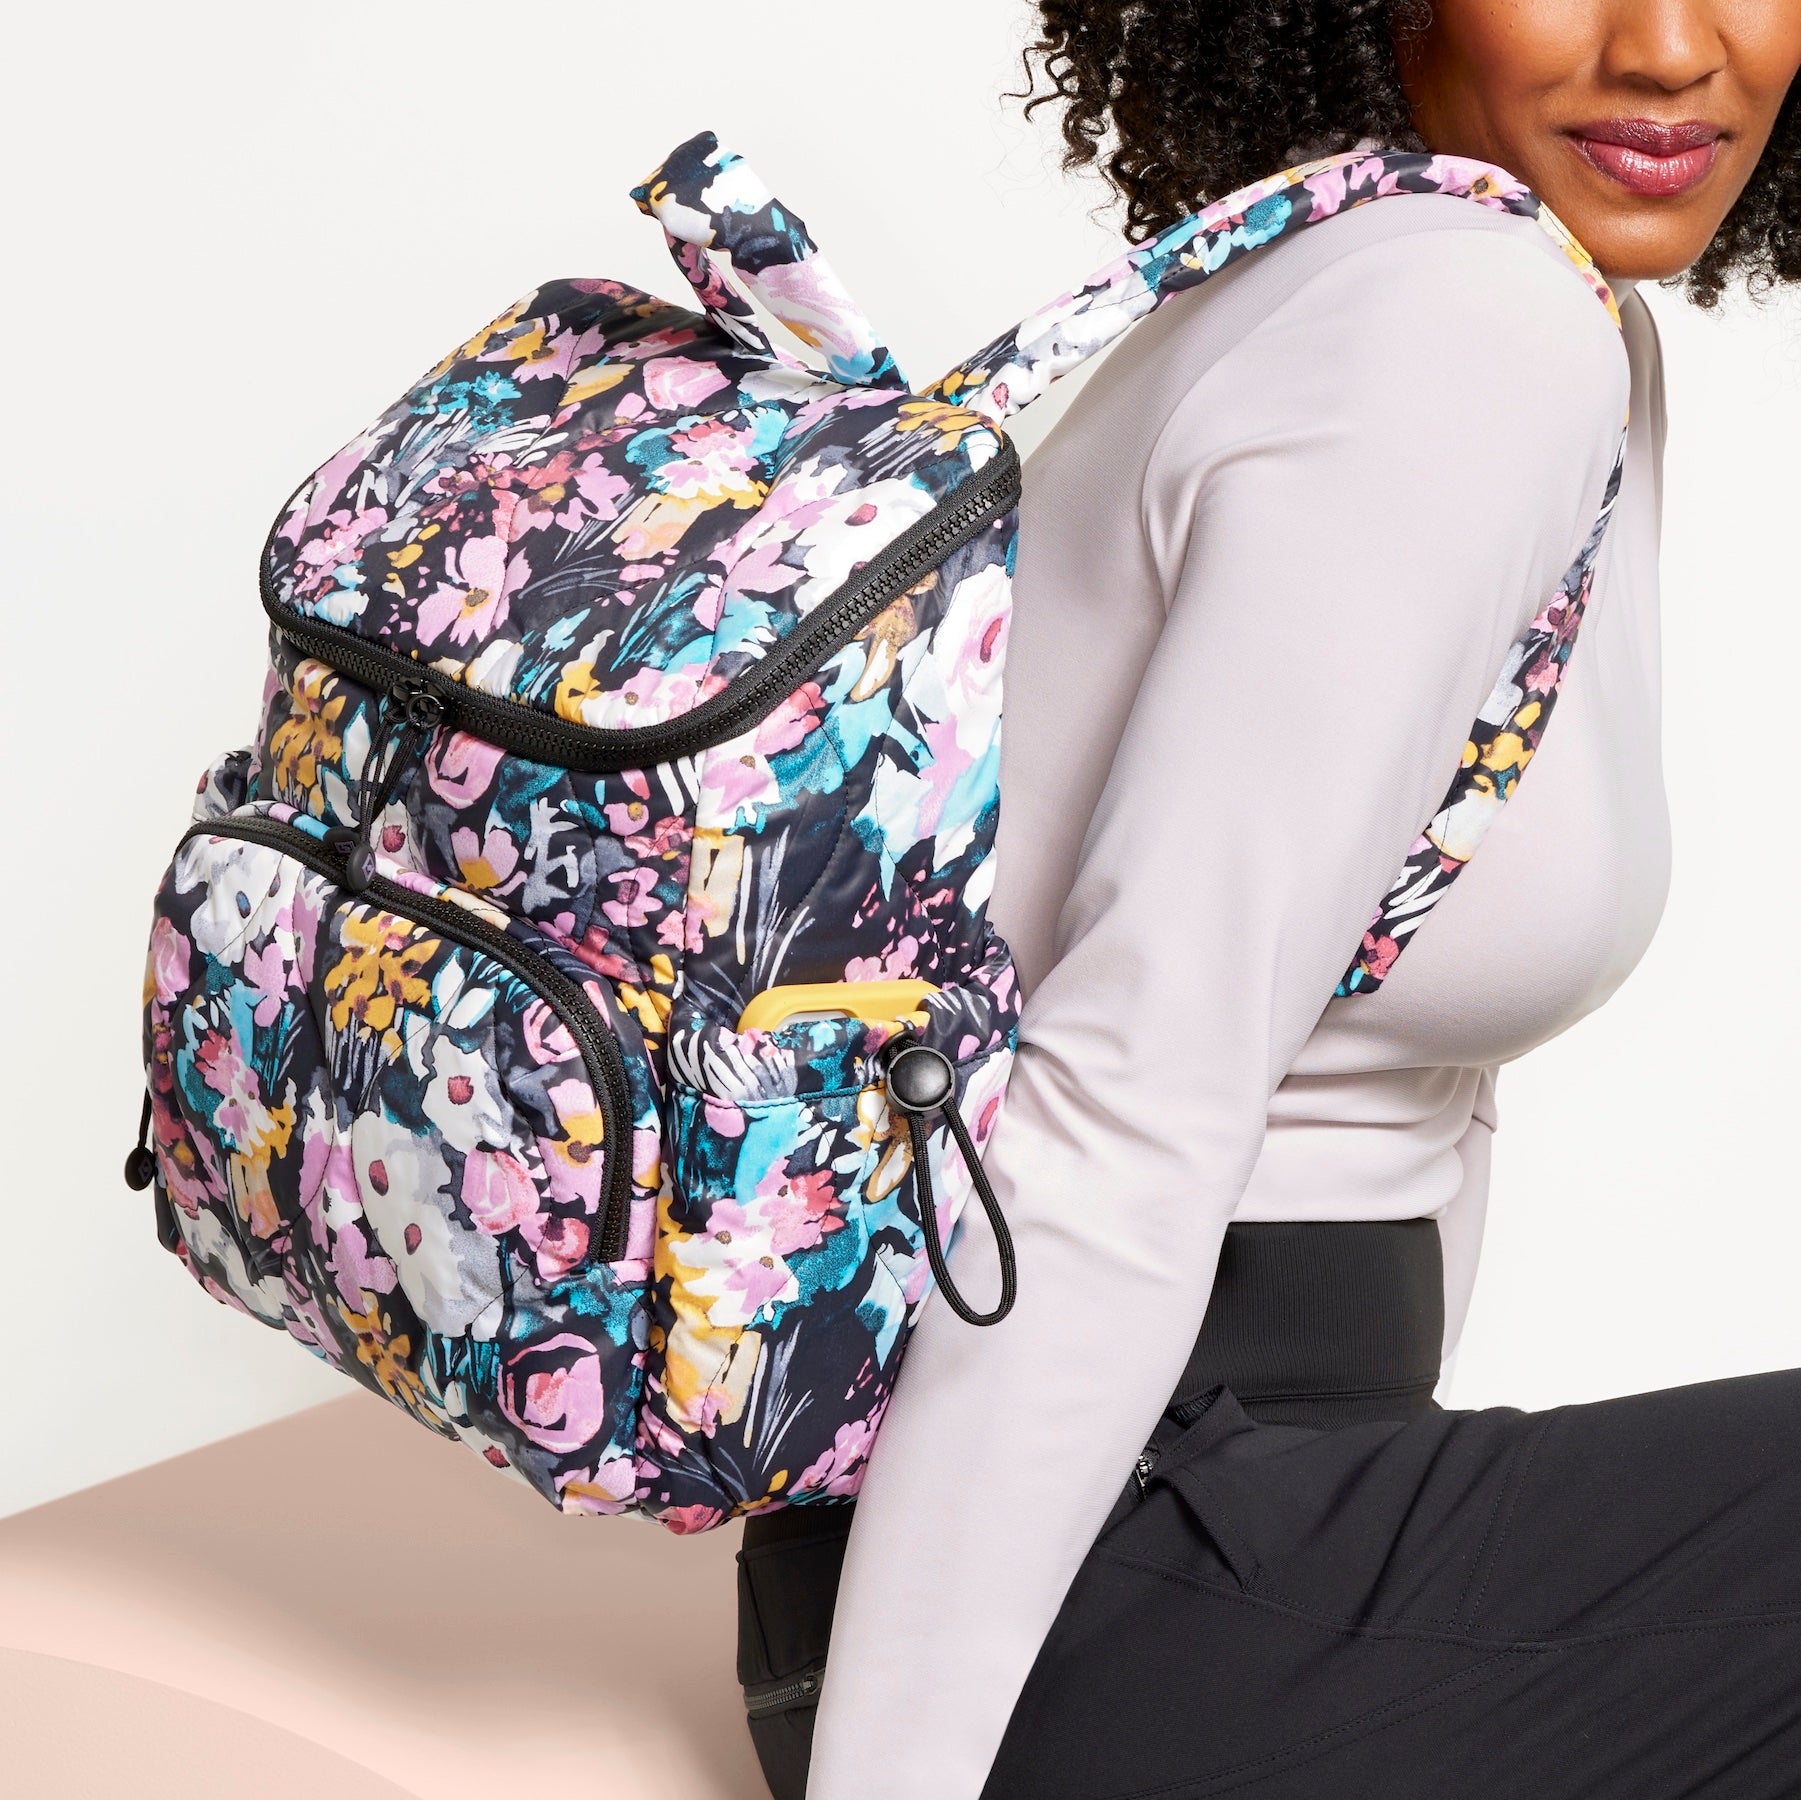 Vera Bradley Backpack Comparison Guide - Thrifty Pineapple  Vera bradley  backpack, Cute diaper bags, Backpack reviews